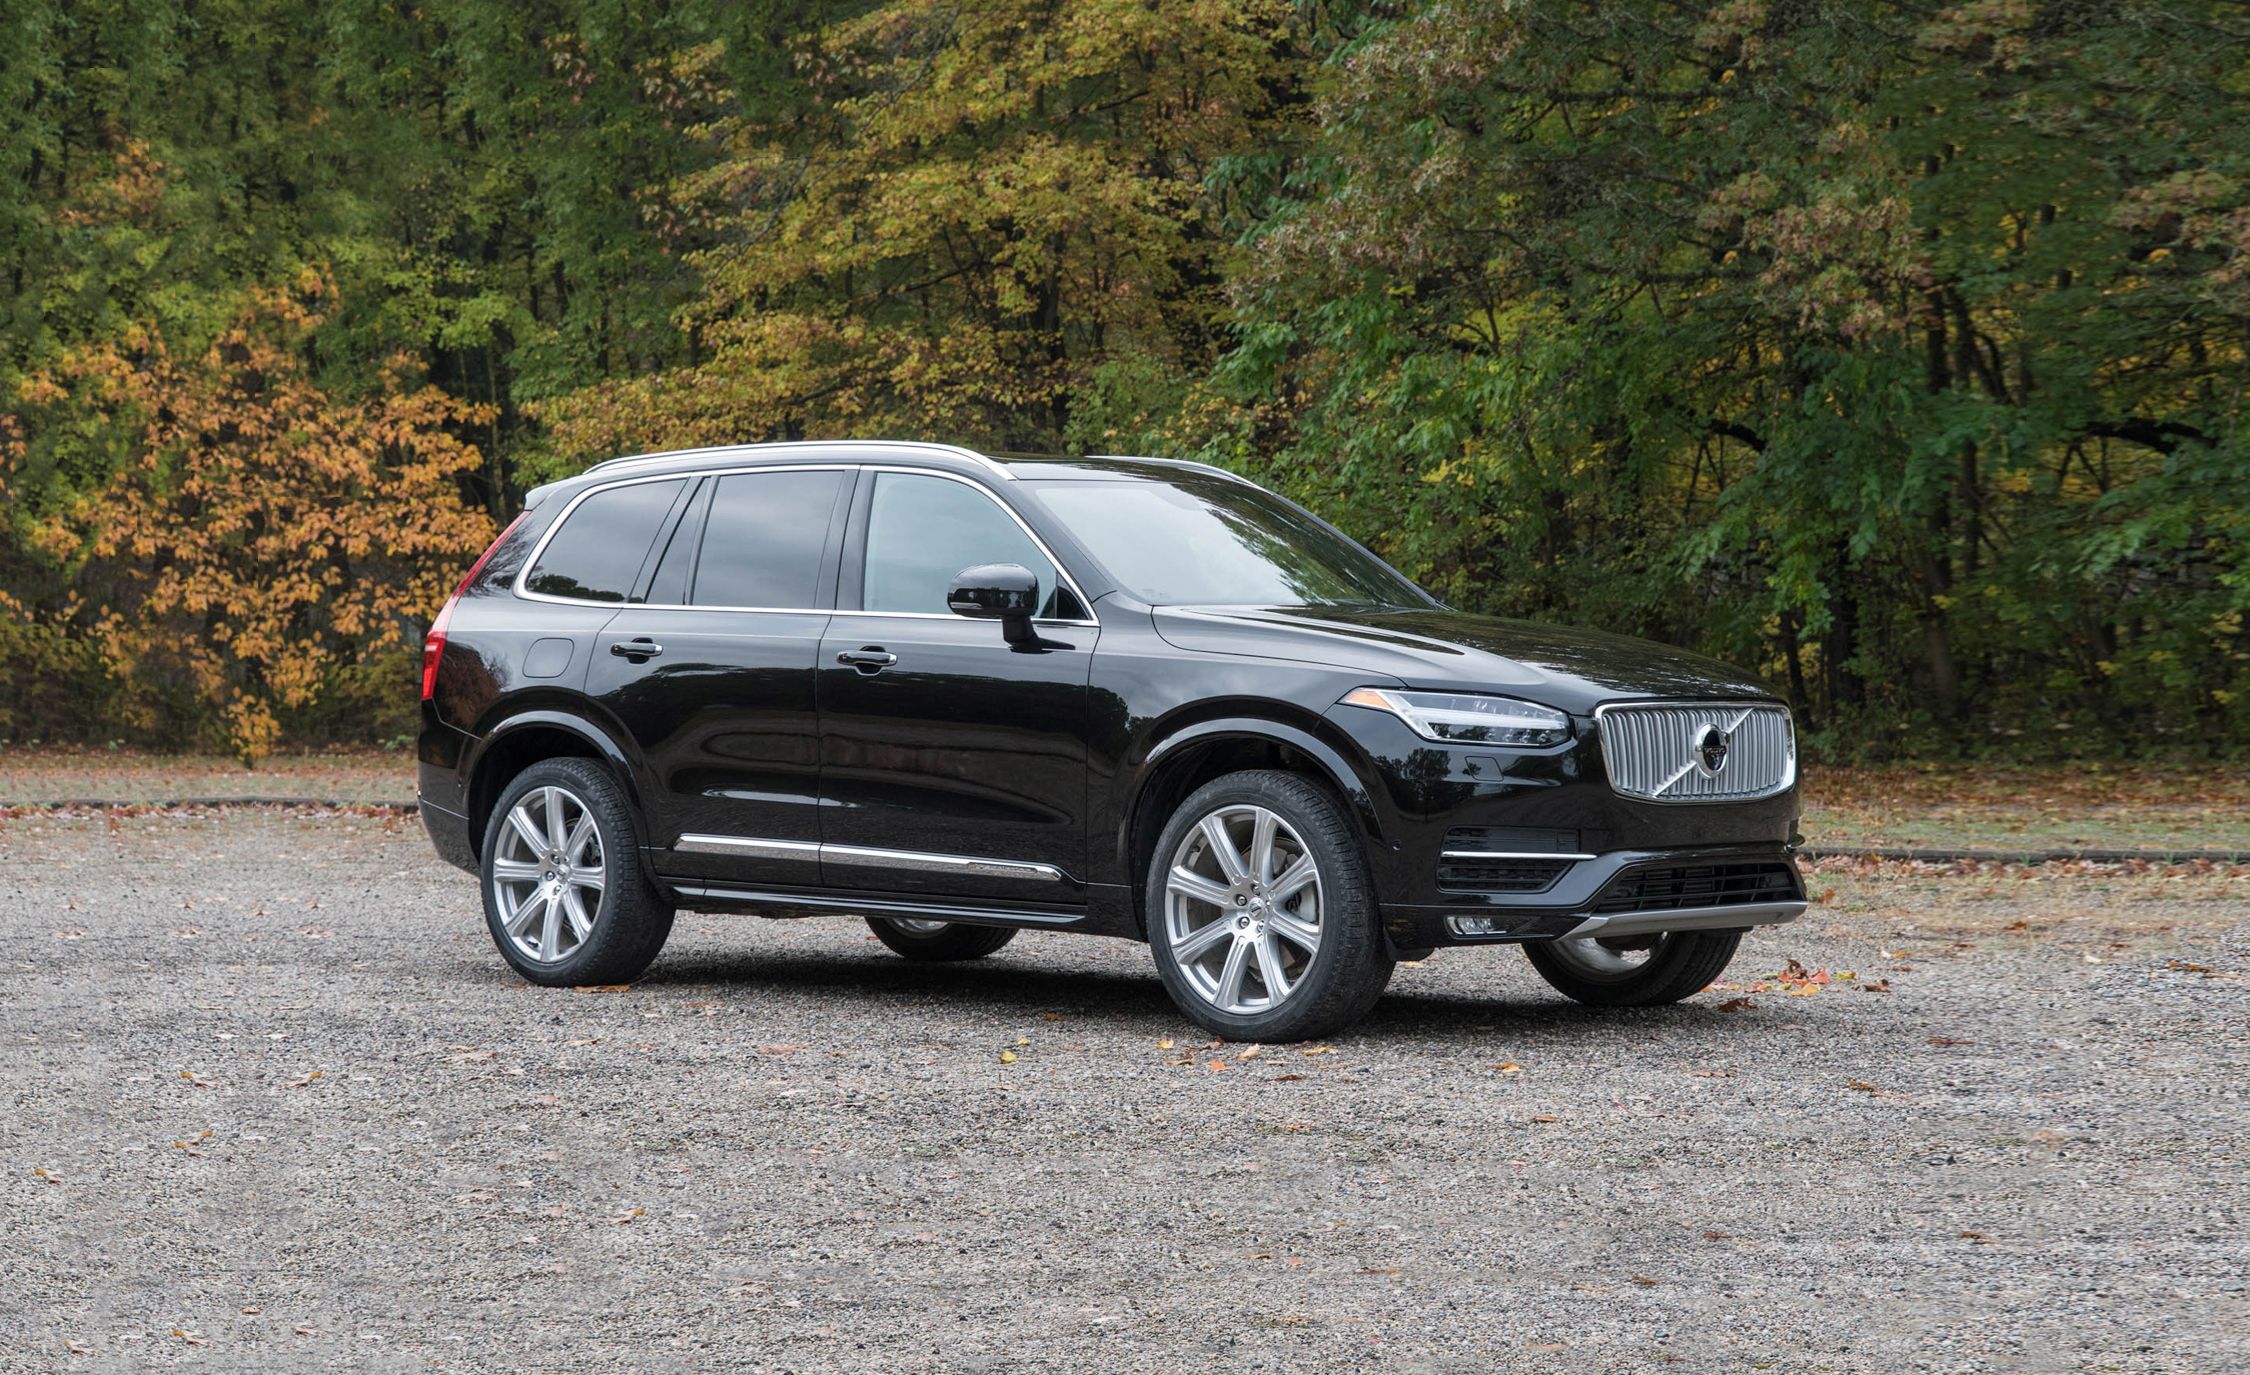 2020 Volvo XC90 Reviews | Volvo XC90 Price, Photos, and Specs | Car and